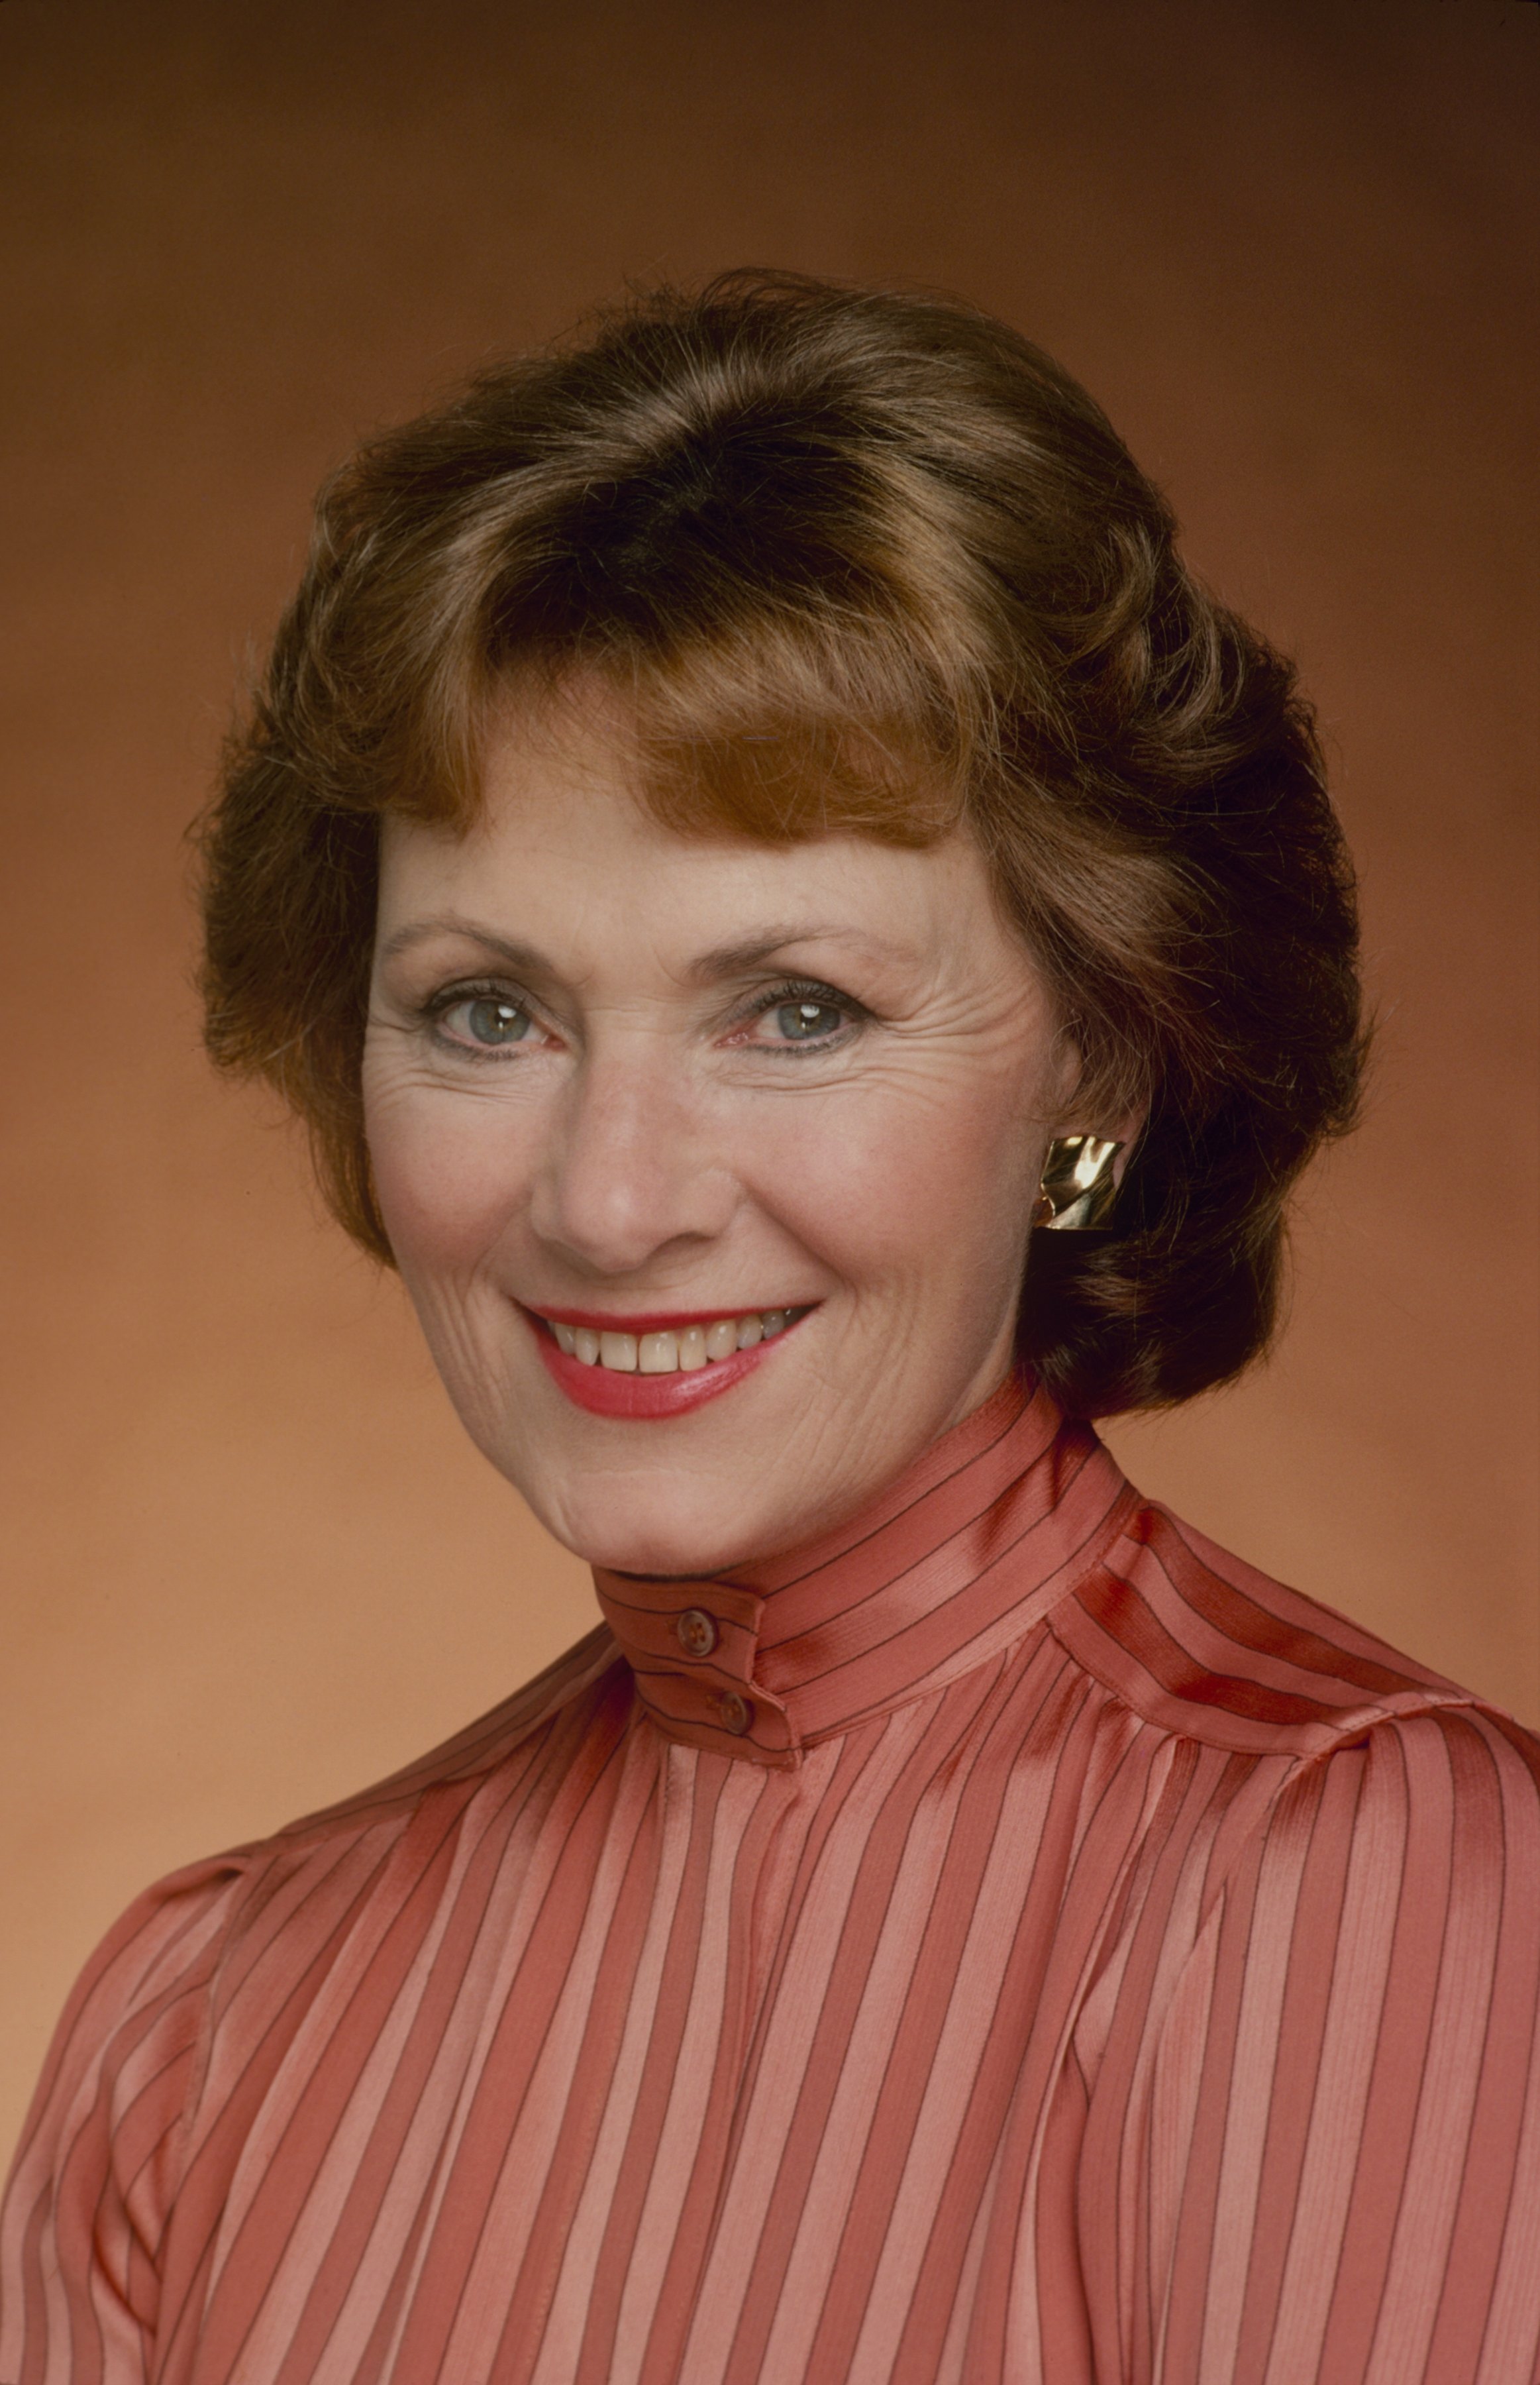 Marion Ross on "Happy Days" in August 1983 | Source: Getty Images